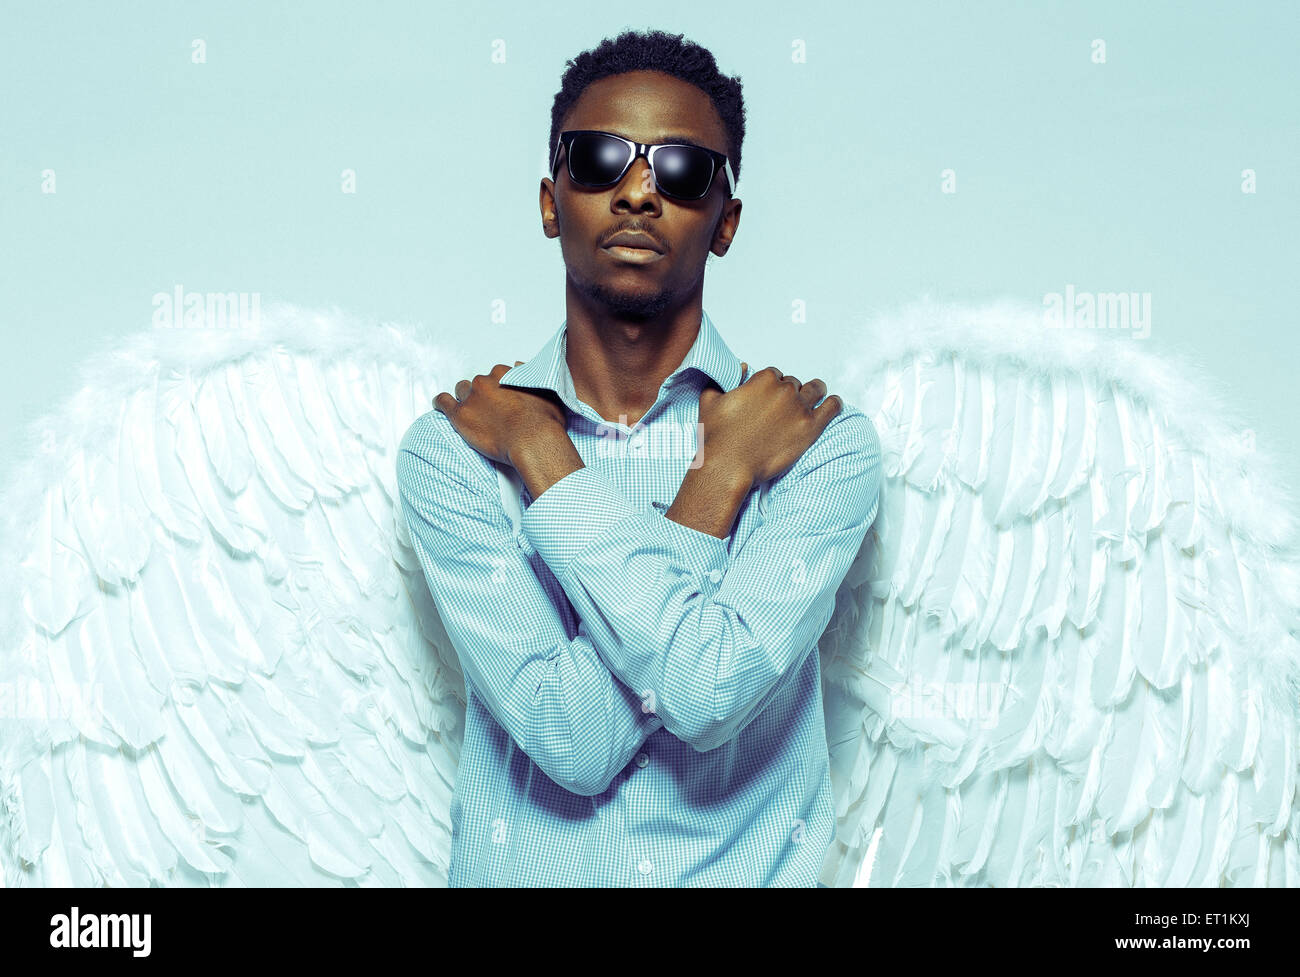 African American young man with angel wings in sunglasses Stock Photo